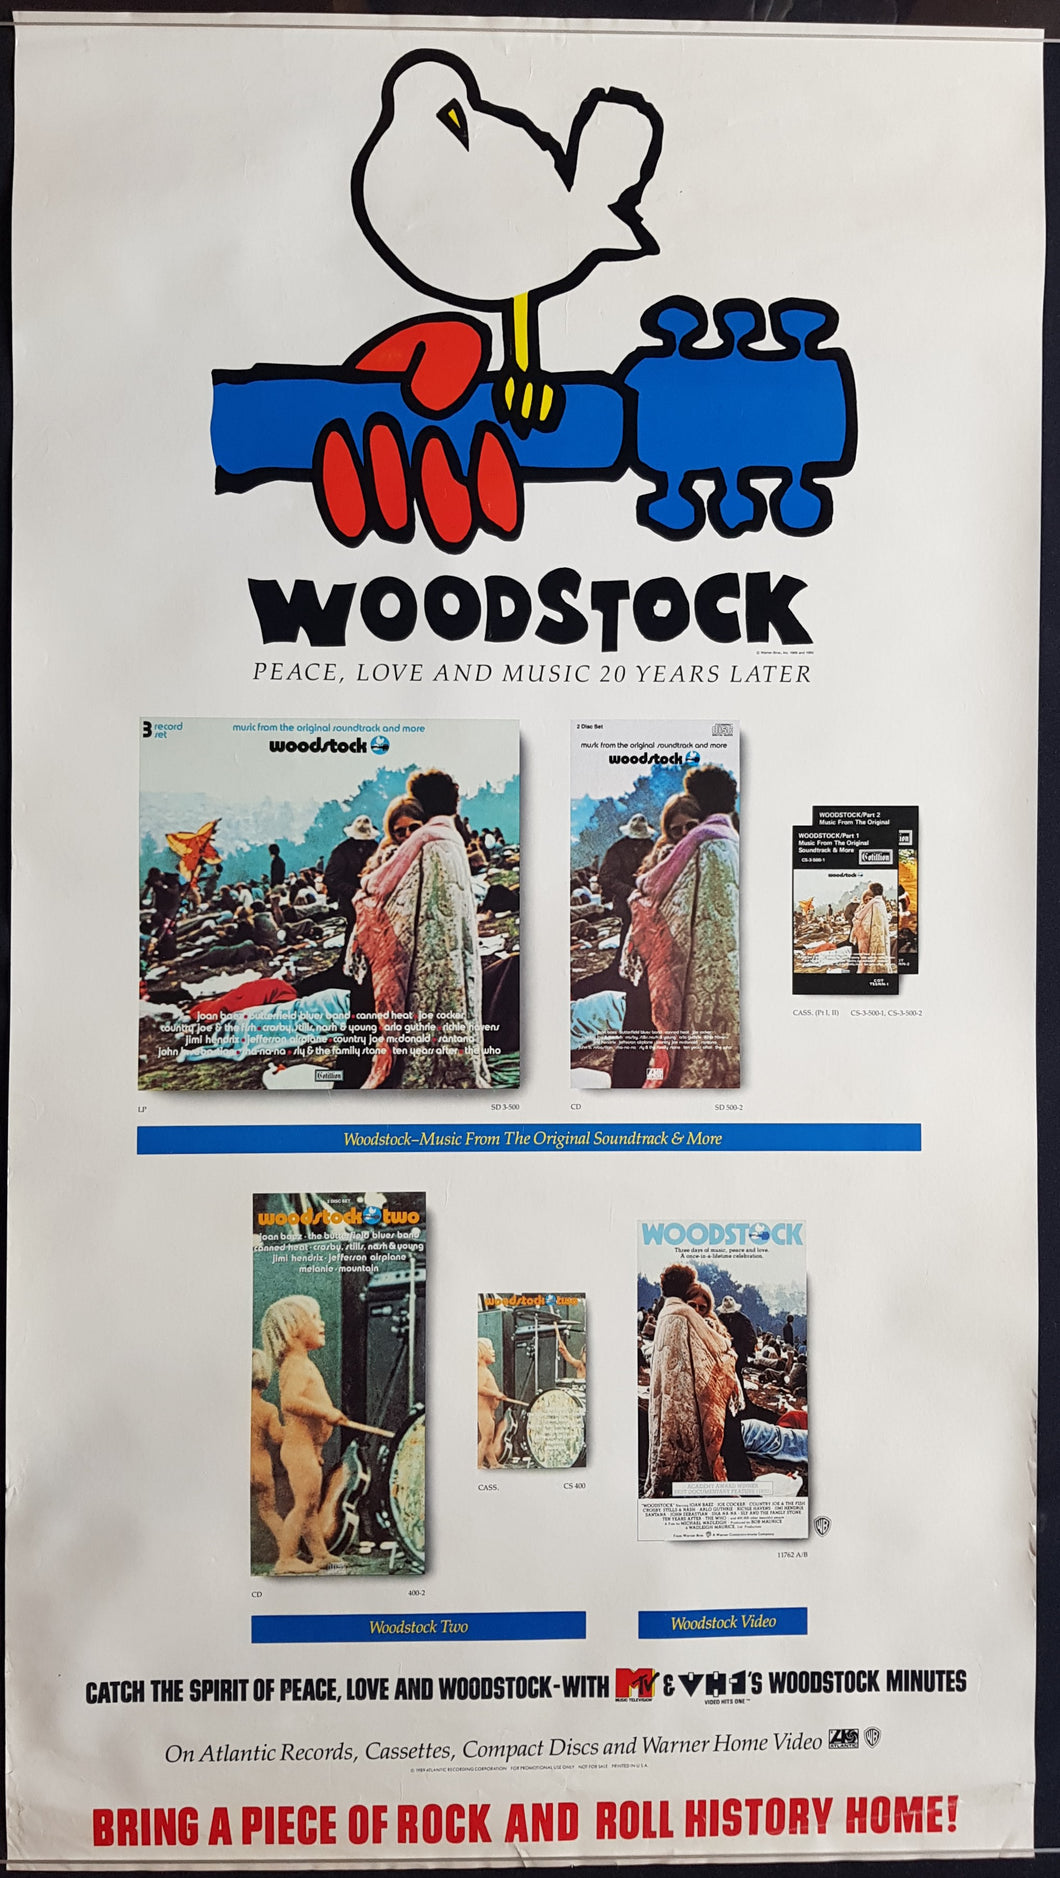 V/A - Woodstock - Peace, Love And Music 20 Years Later